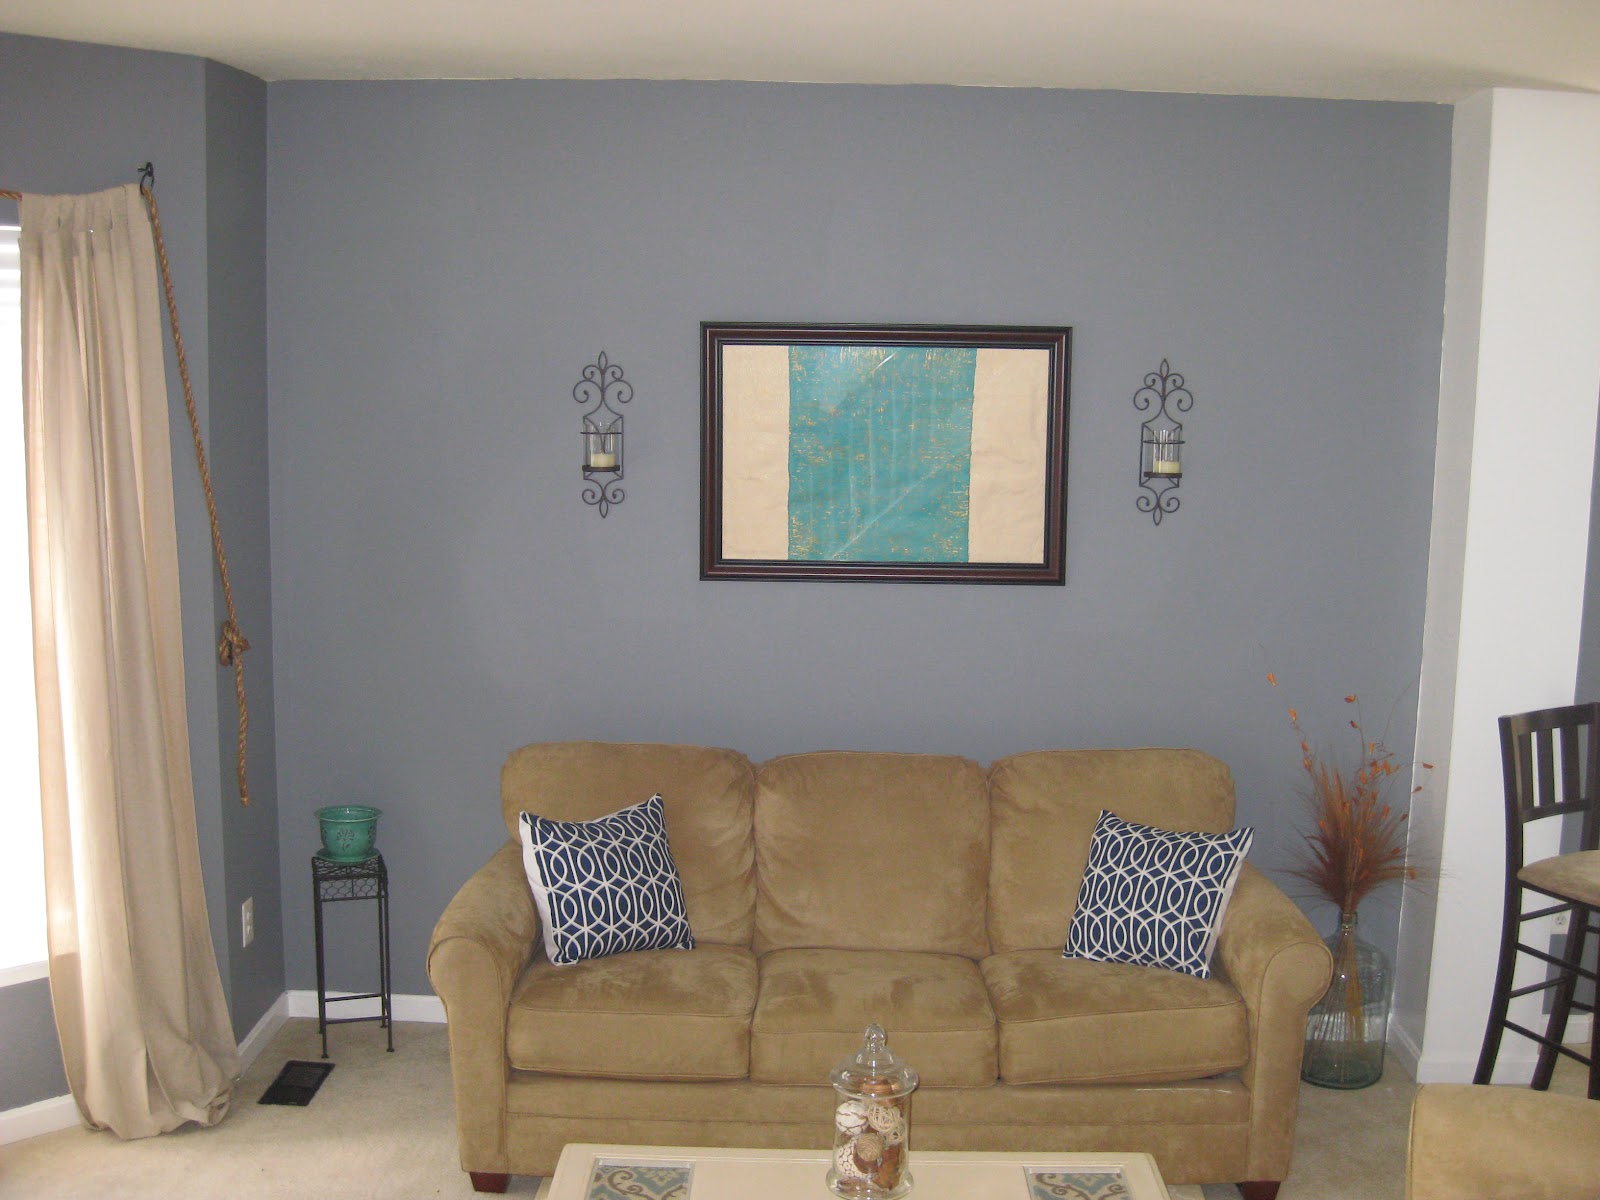 Our Pinteresting Family: Framed Out Living Room Wall by Amy & Chris